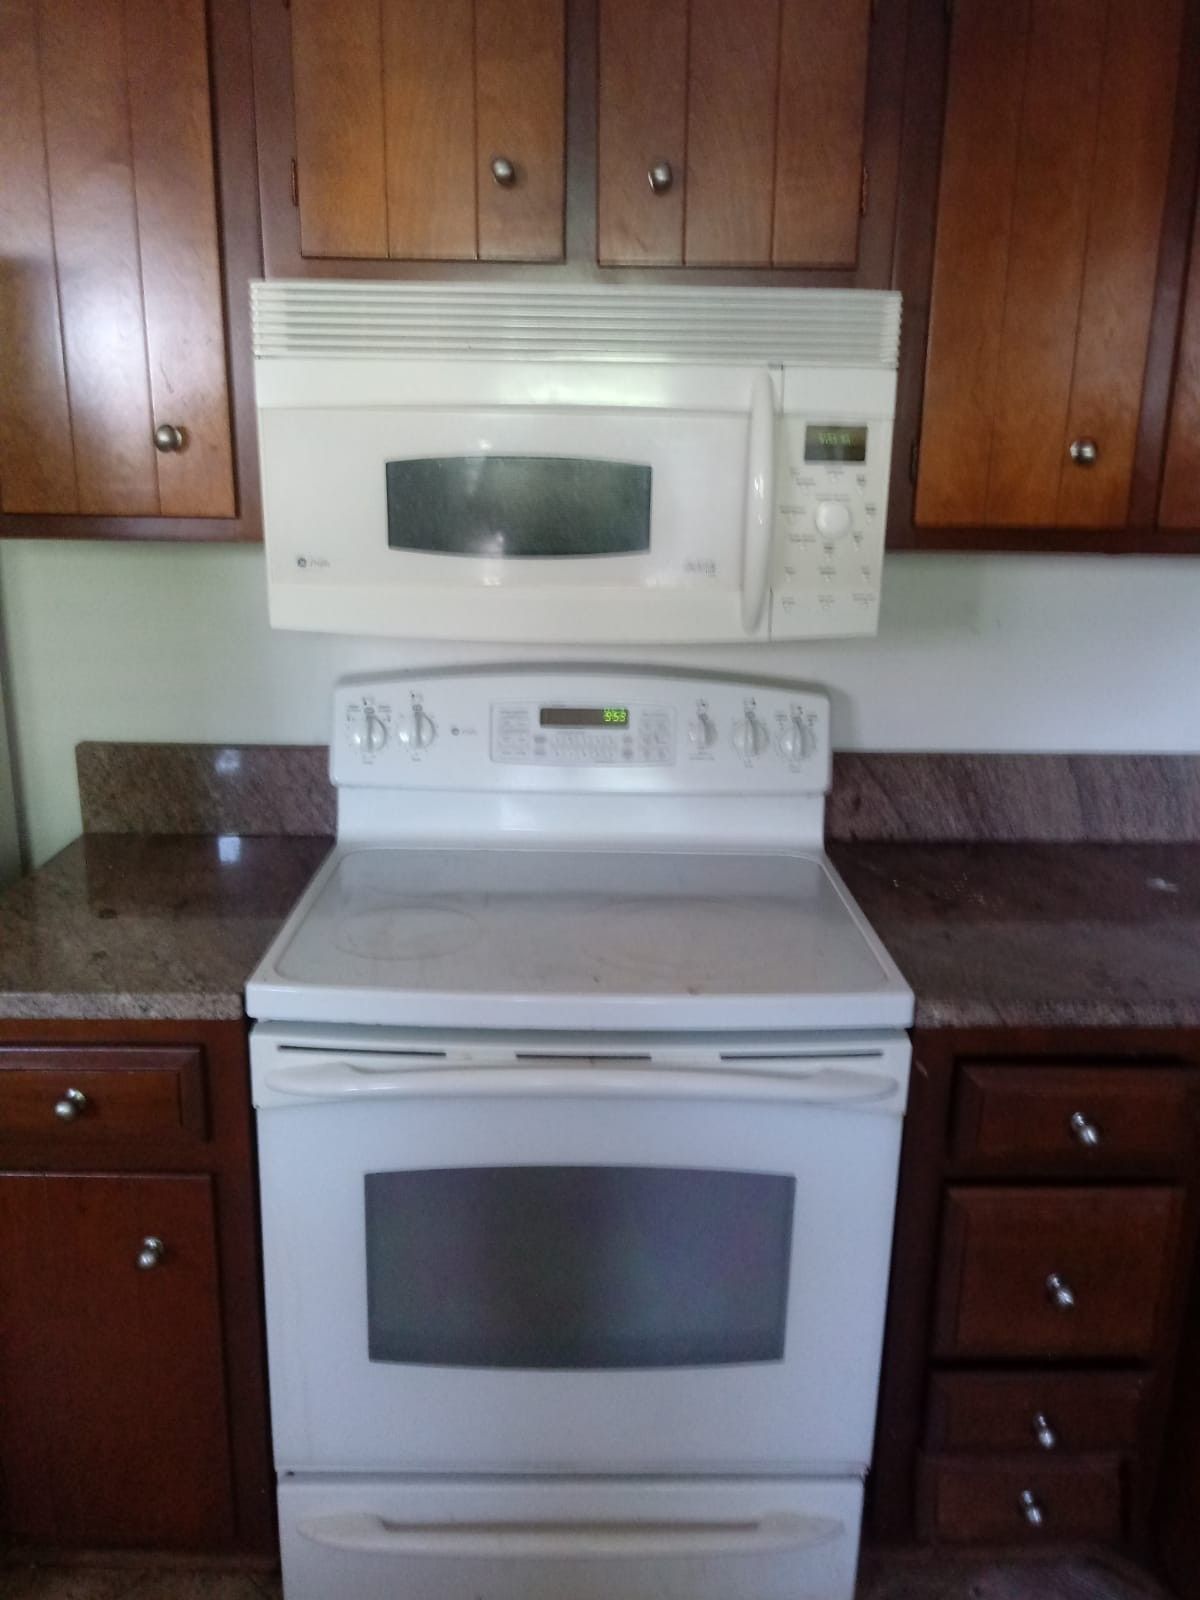 stove microwave and refrigerator the three things in $ 250 in very good condition these located in vienna